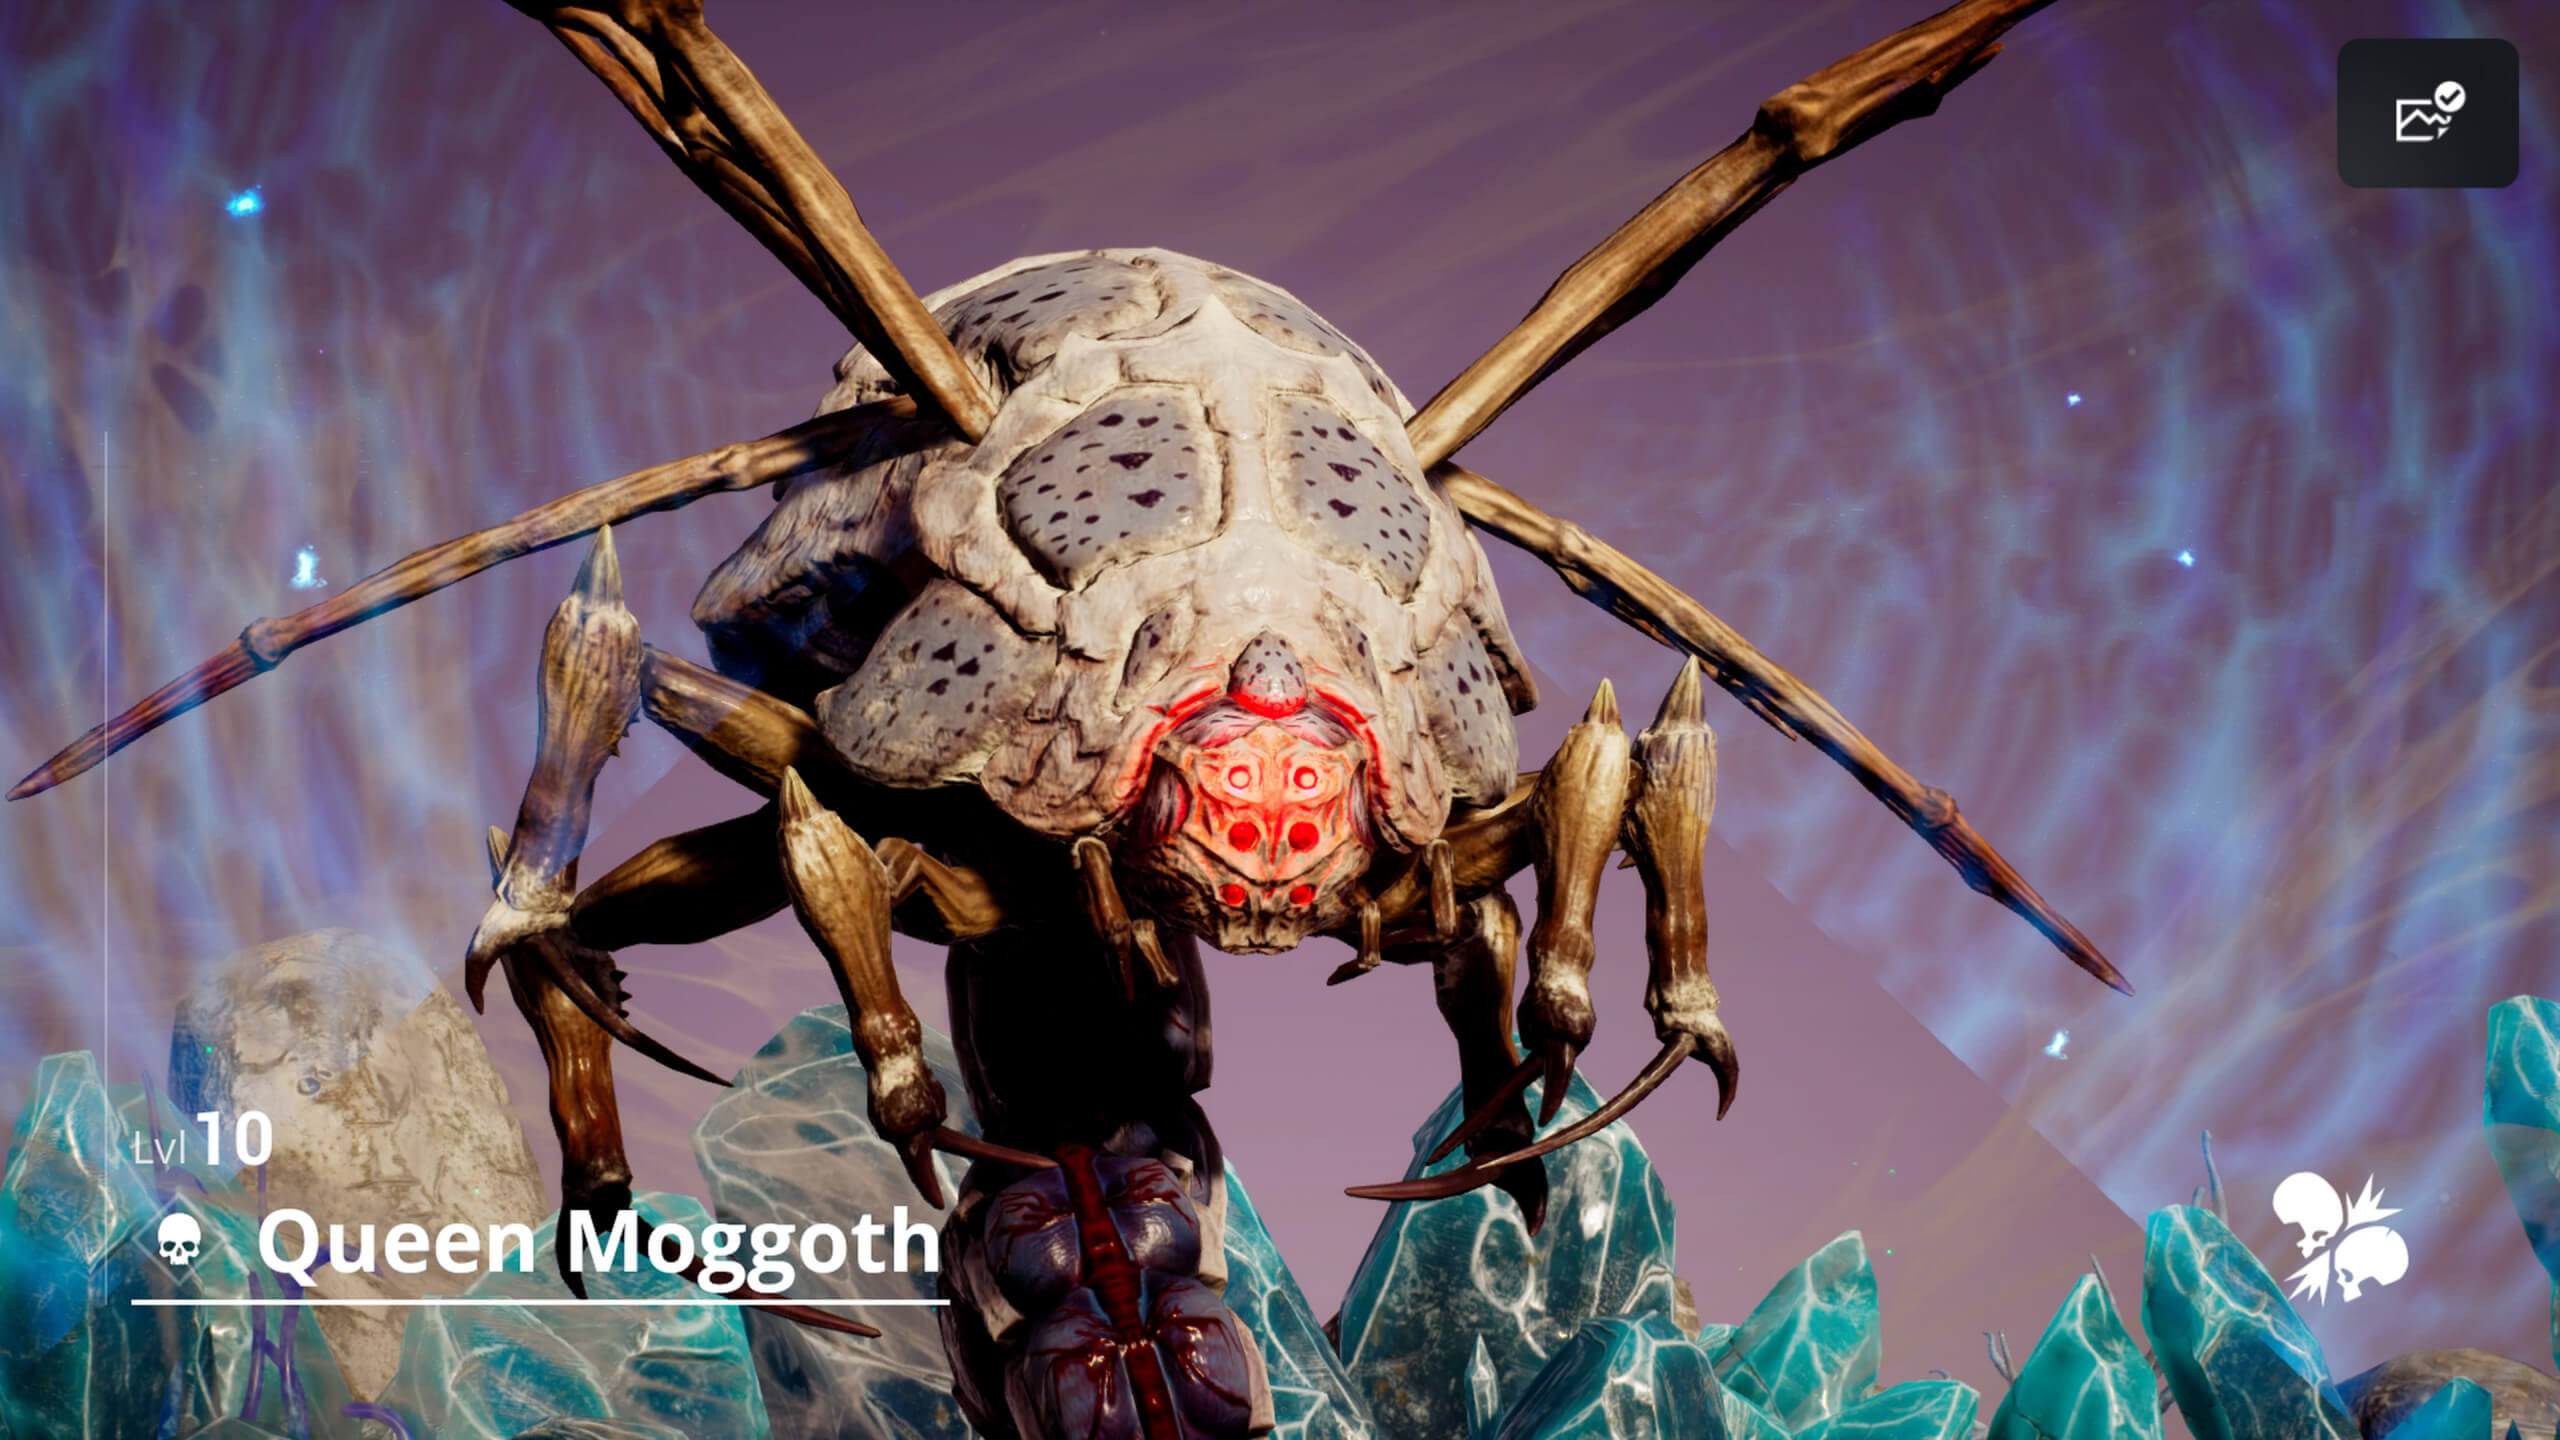 A boss introduction, showing a level 10 boss named Queen Moggoth